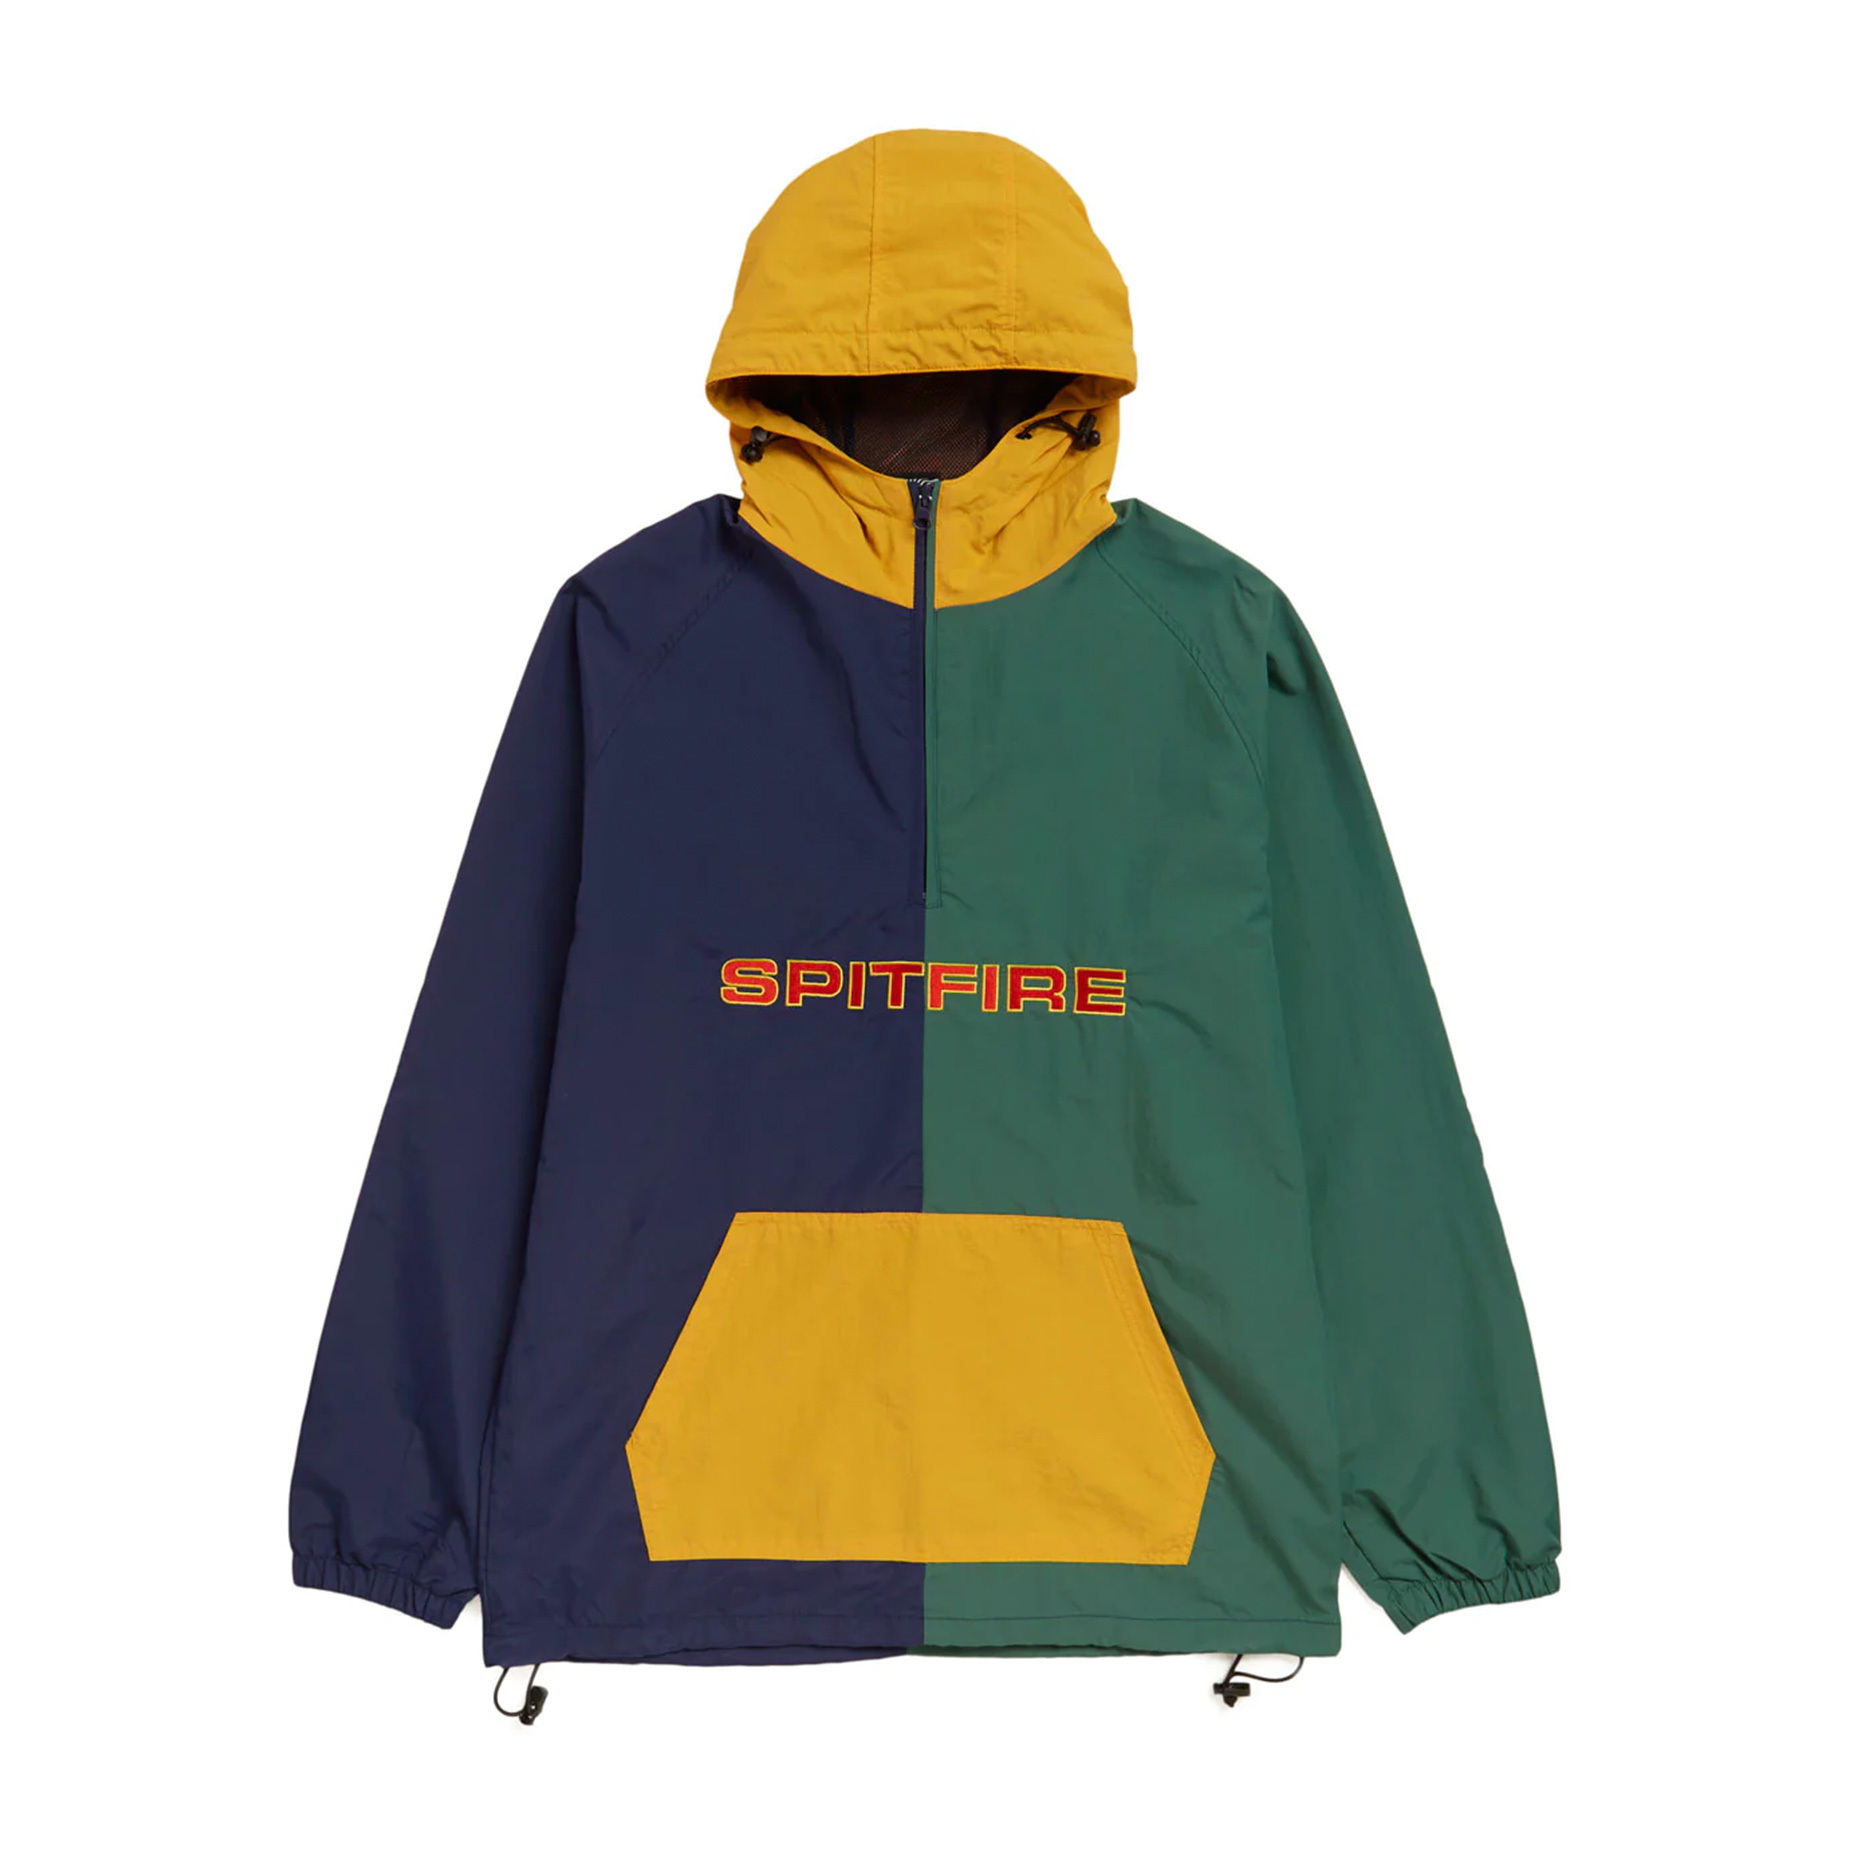 Spitfire Classic 87 Pop Over Jacket - Navy/Green/Yellow